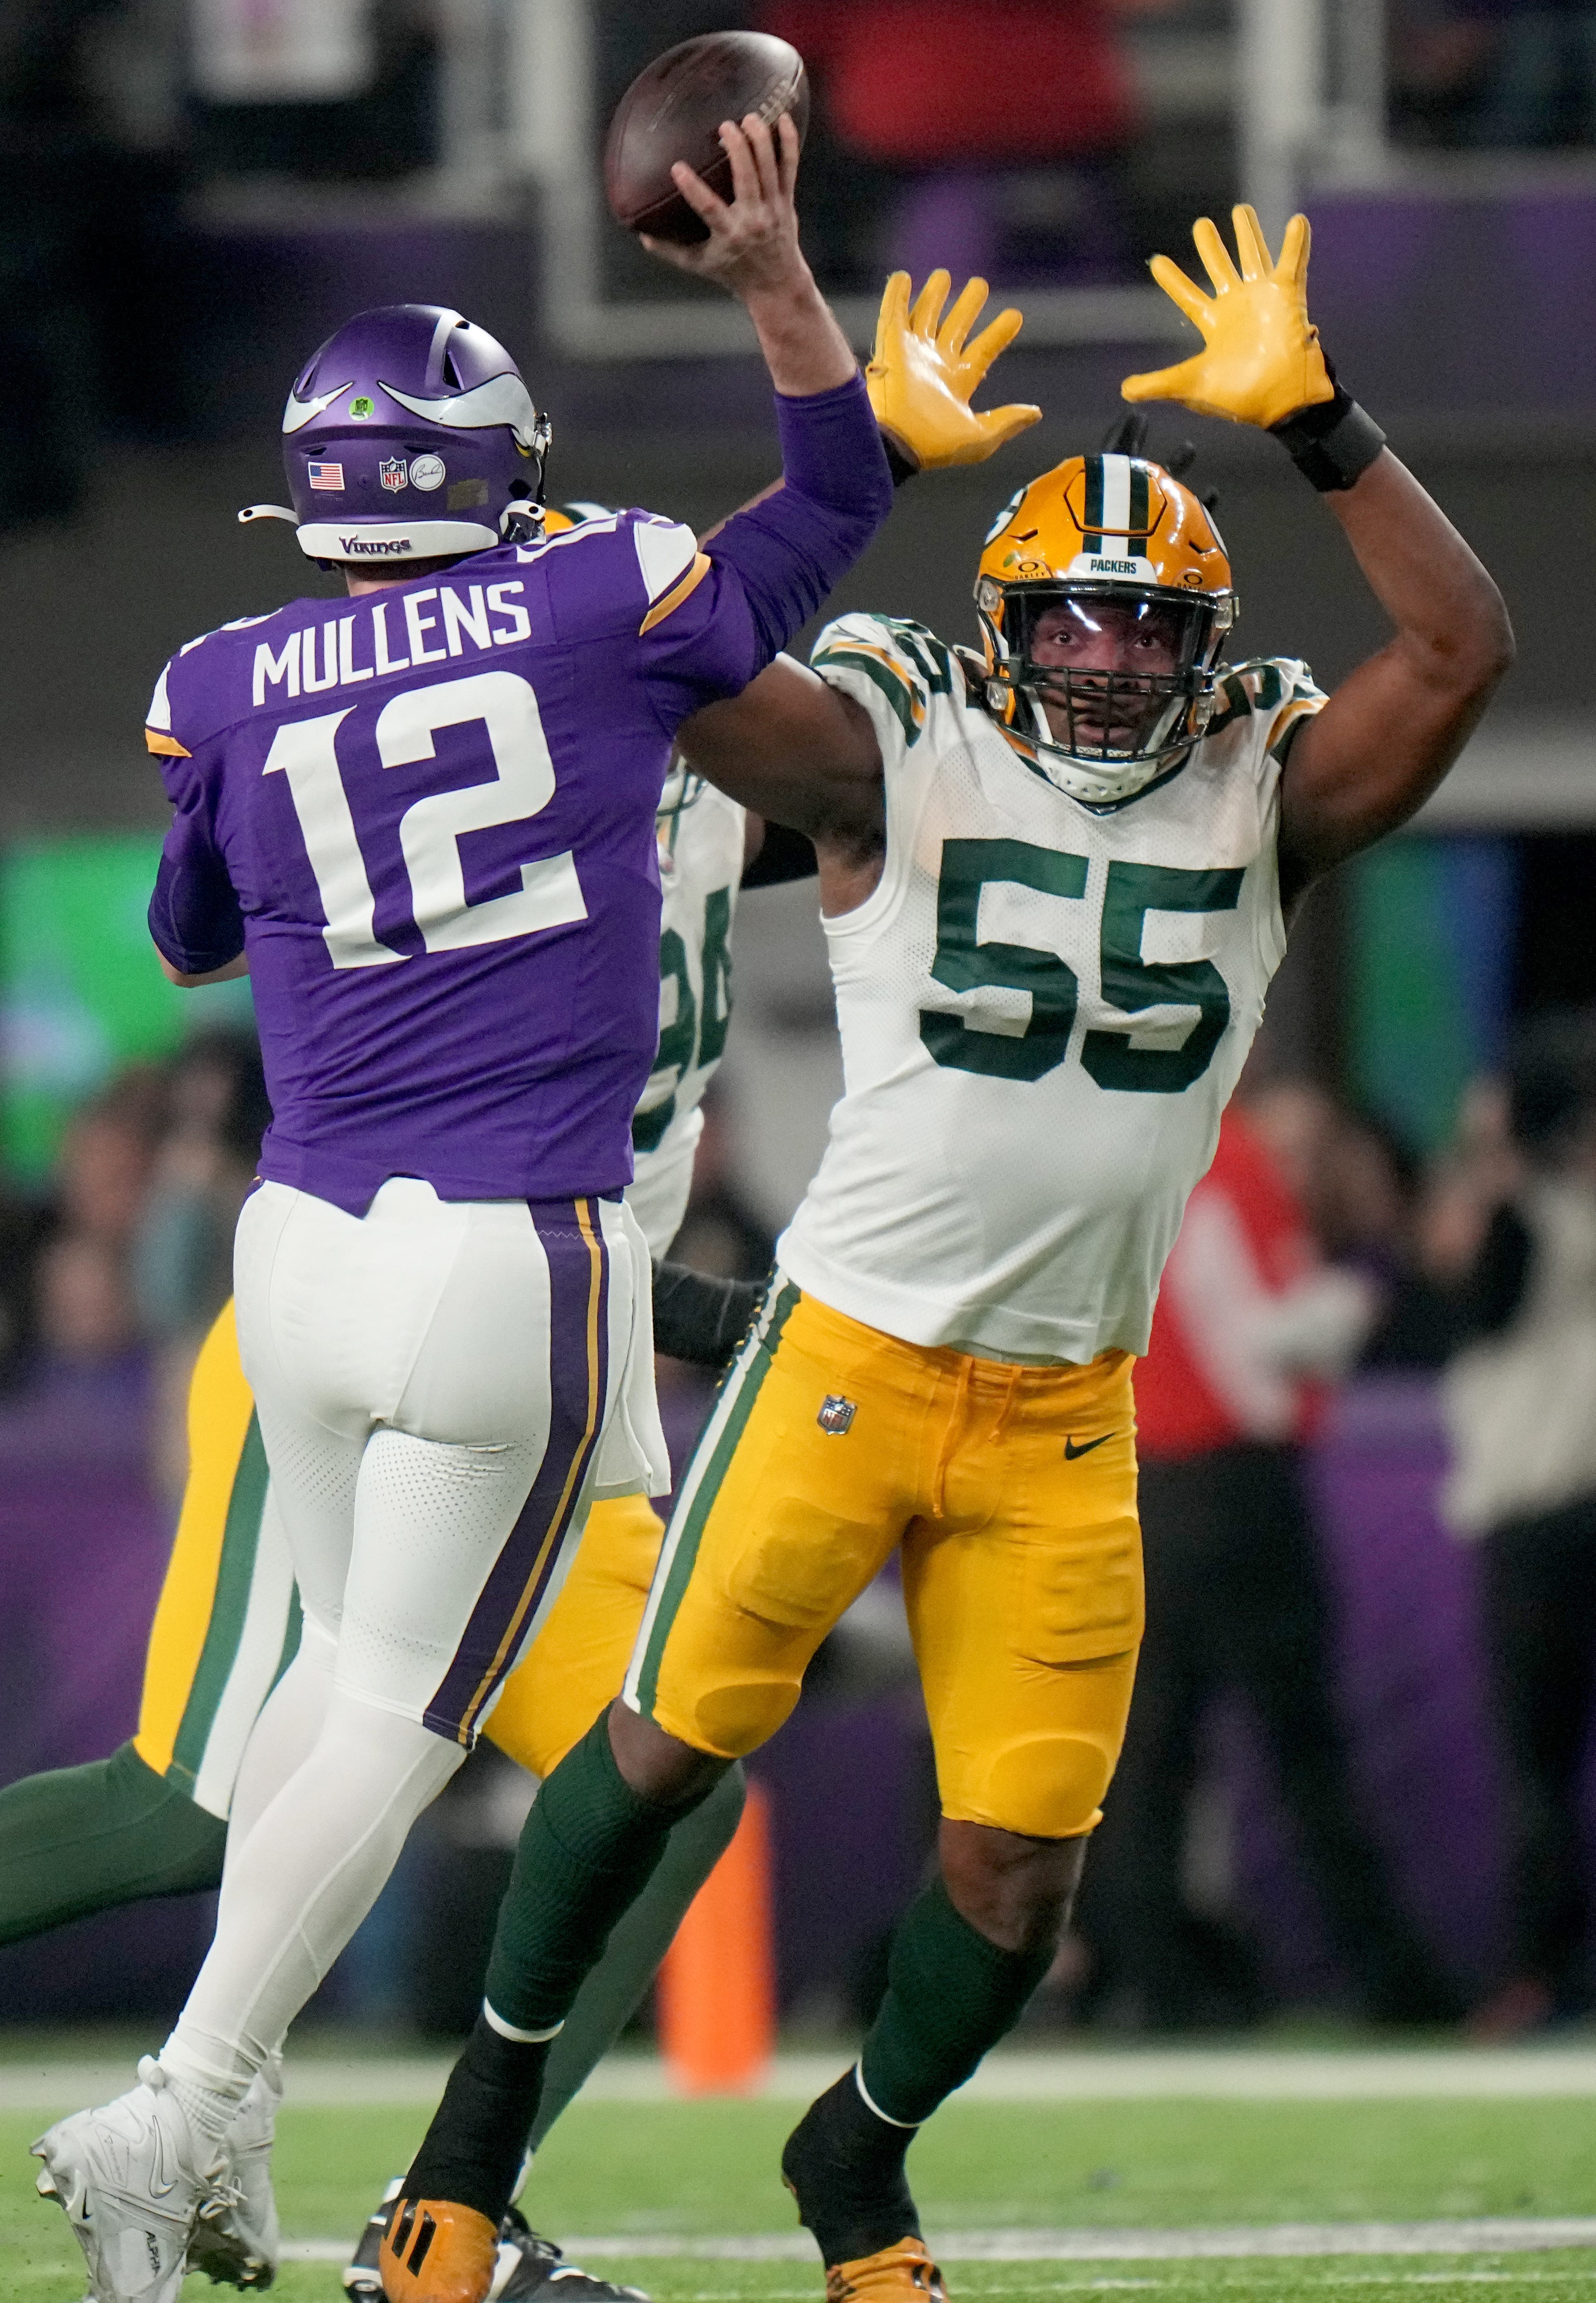 Minnesota Vikings quarterback Nick Mullens (12) is pressed by Green Bay Packers linebacker Kingsley Enagbare (55) during the fourth quarter of their game Sunday, December 31, 2023 at U.S. Bank Stadium in Minneapolis, Minnesota. The Green Bay Packers beat the Minnesota Vikings 33-10.